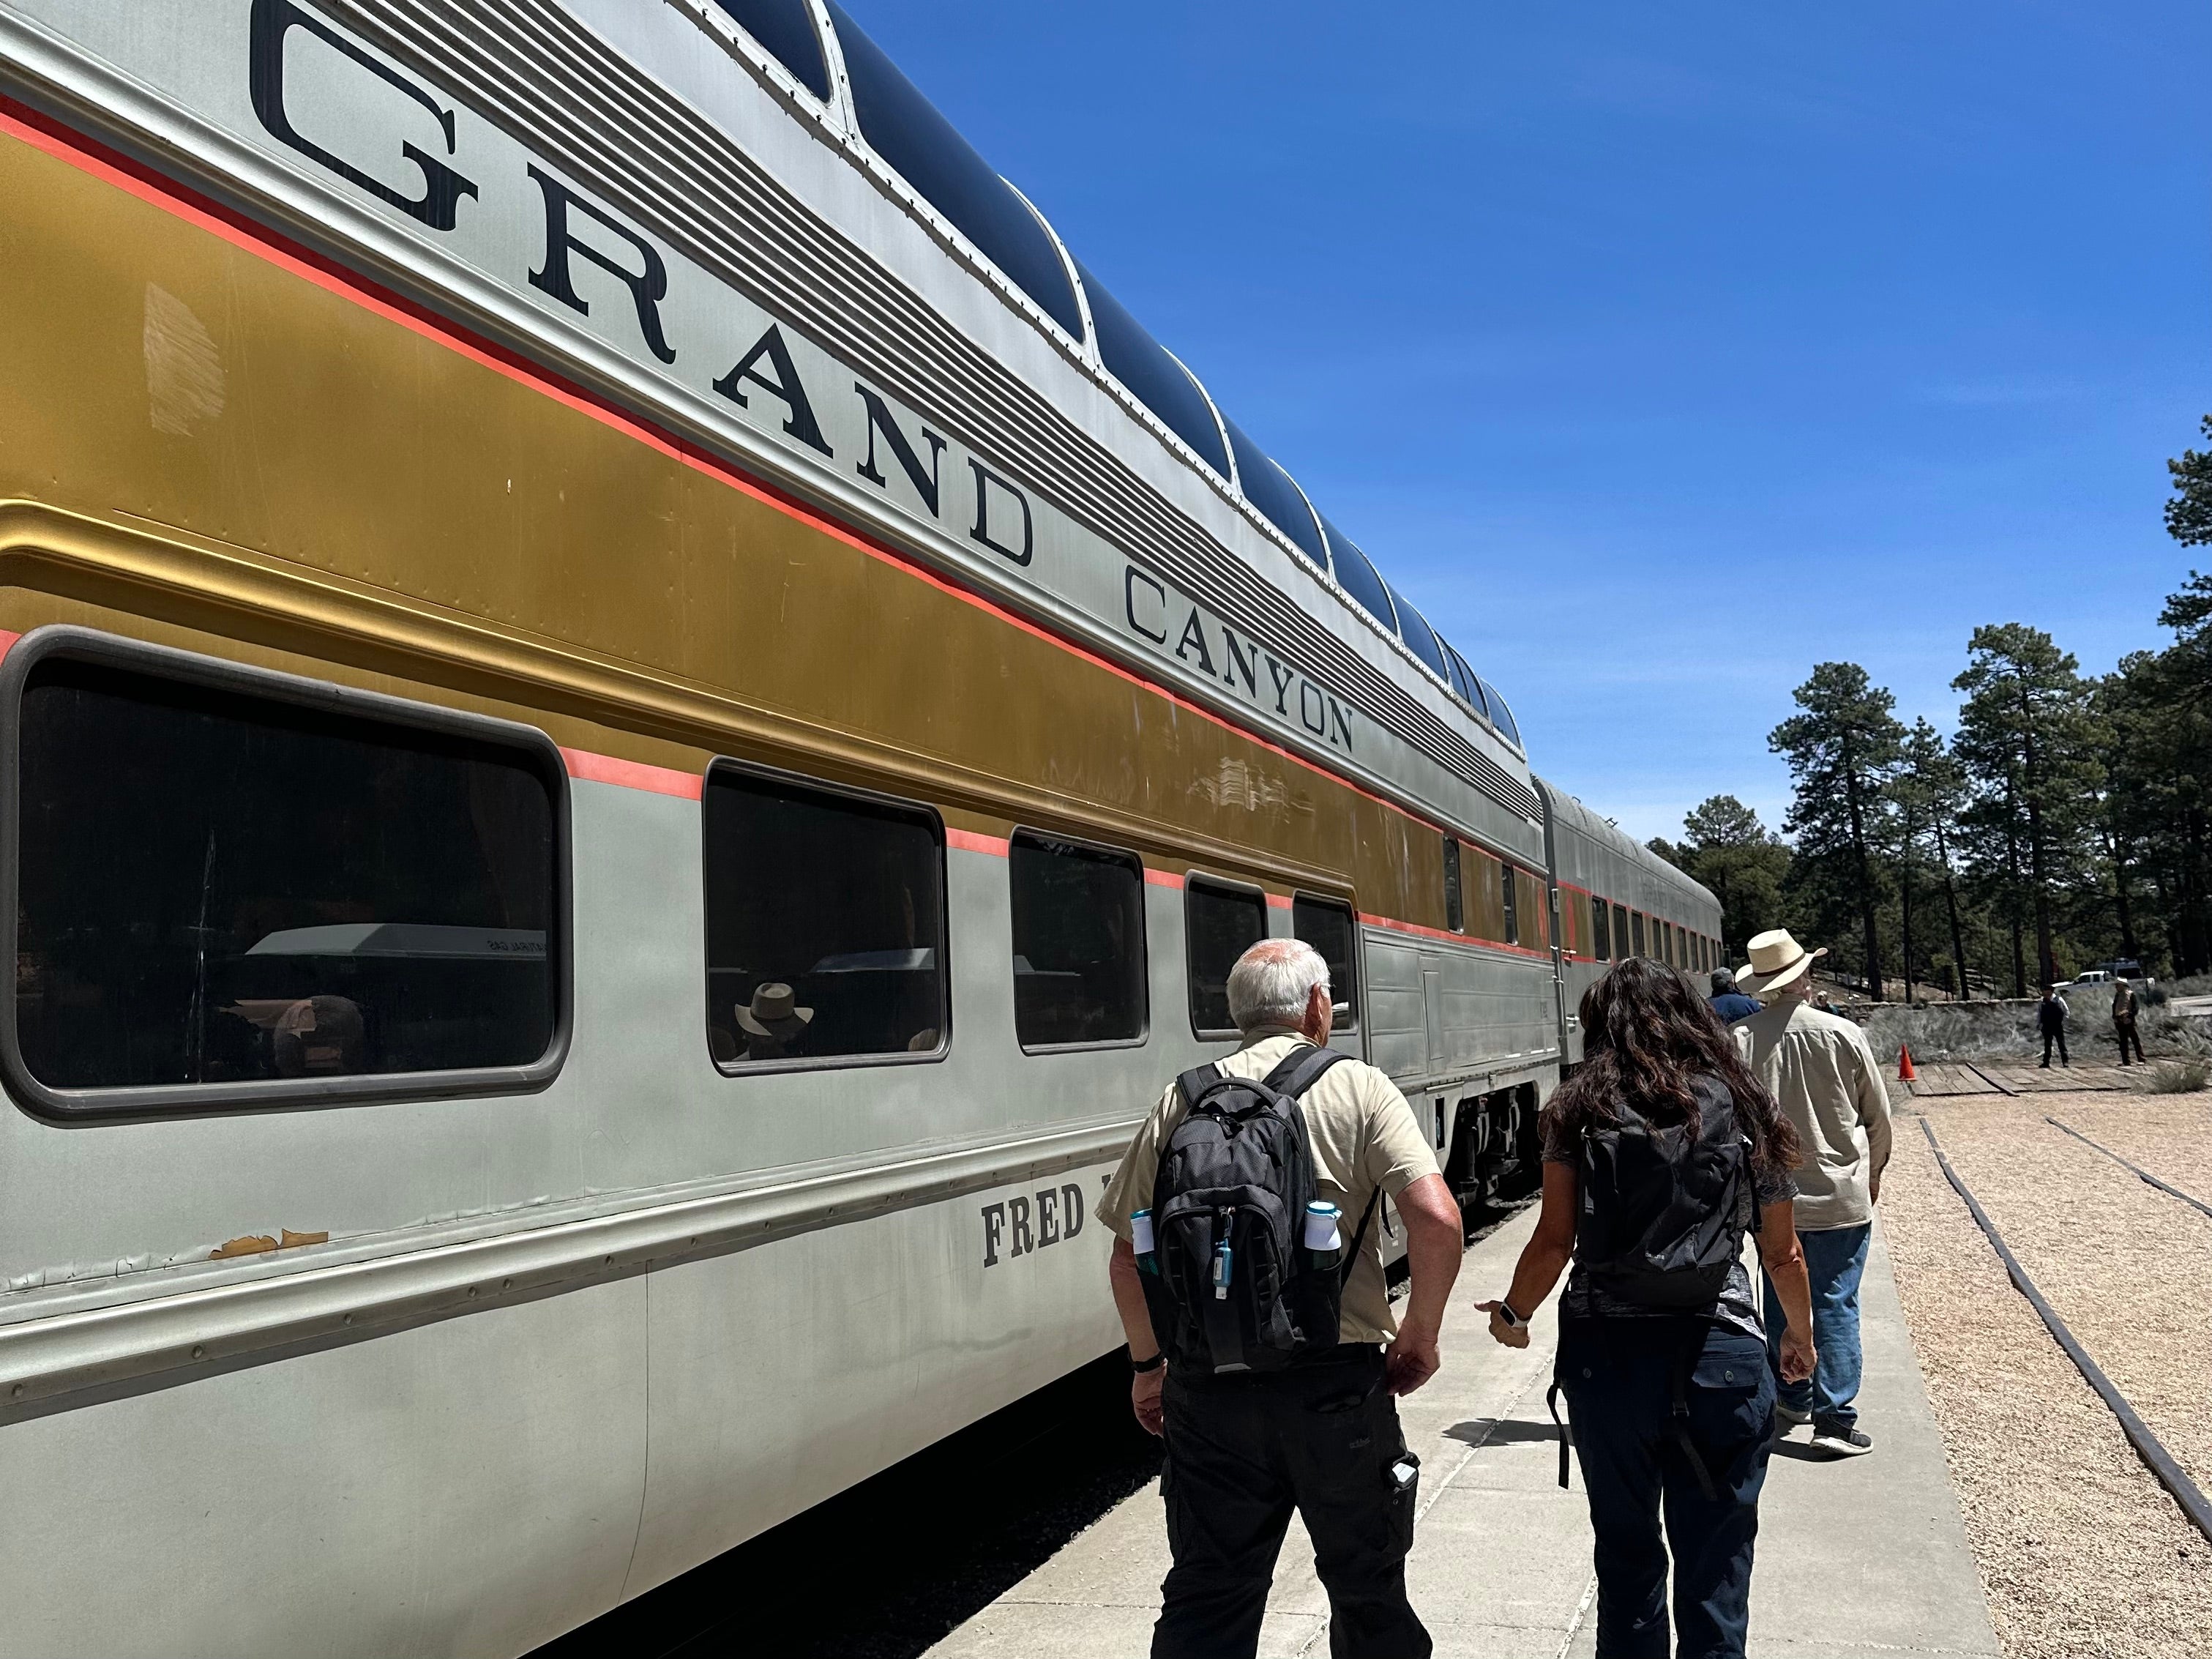 All aboard the Grand Canyon train